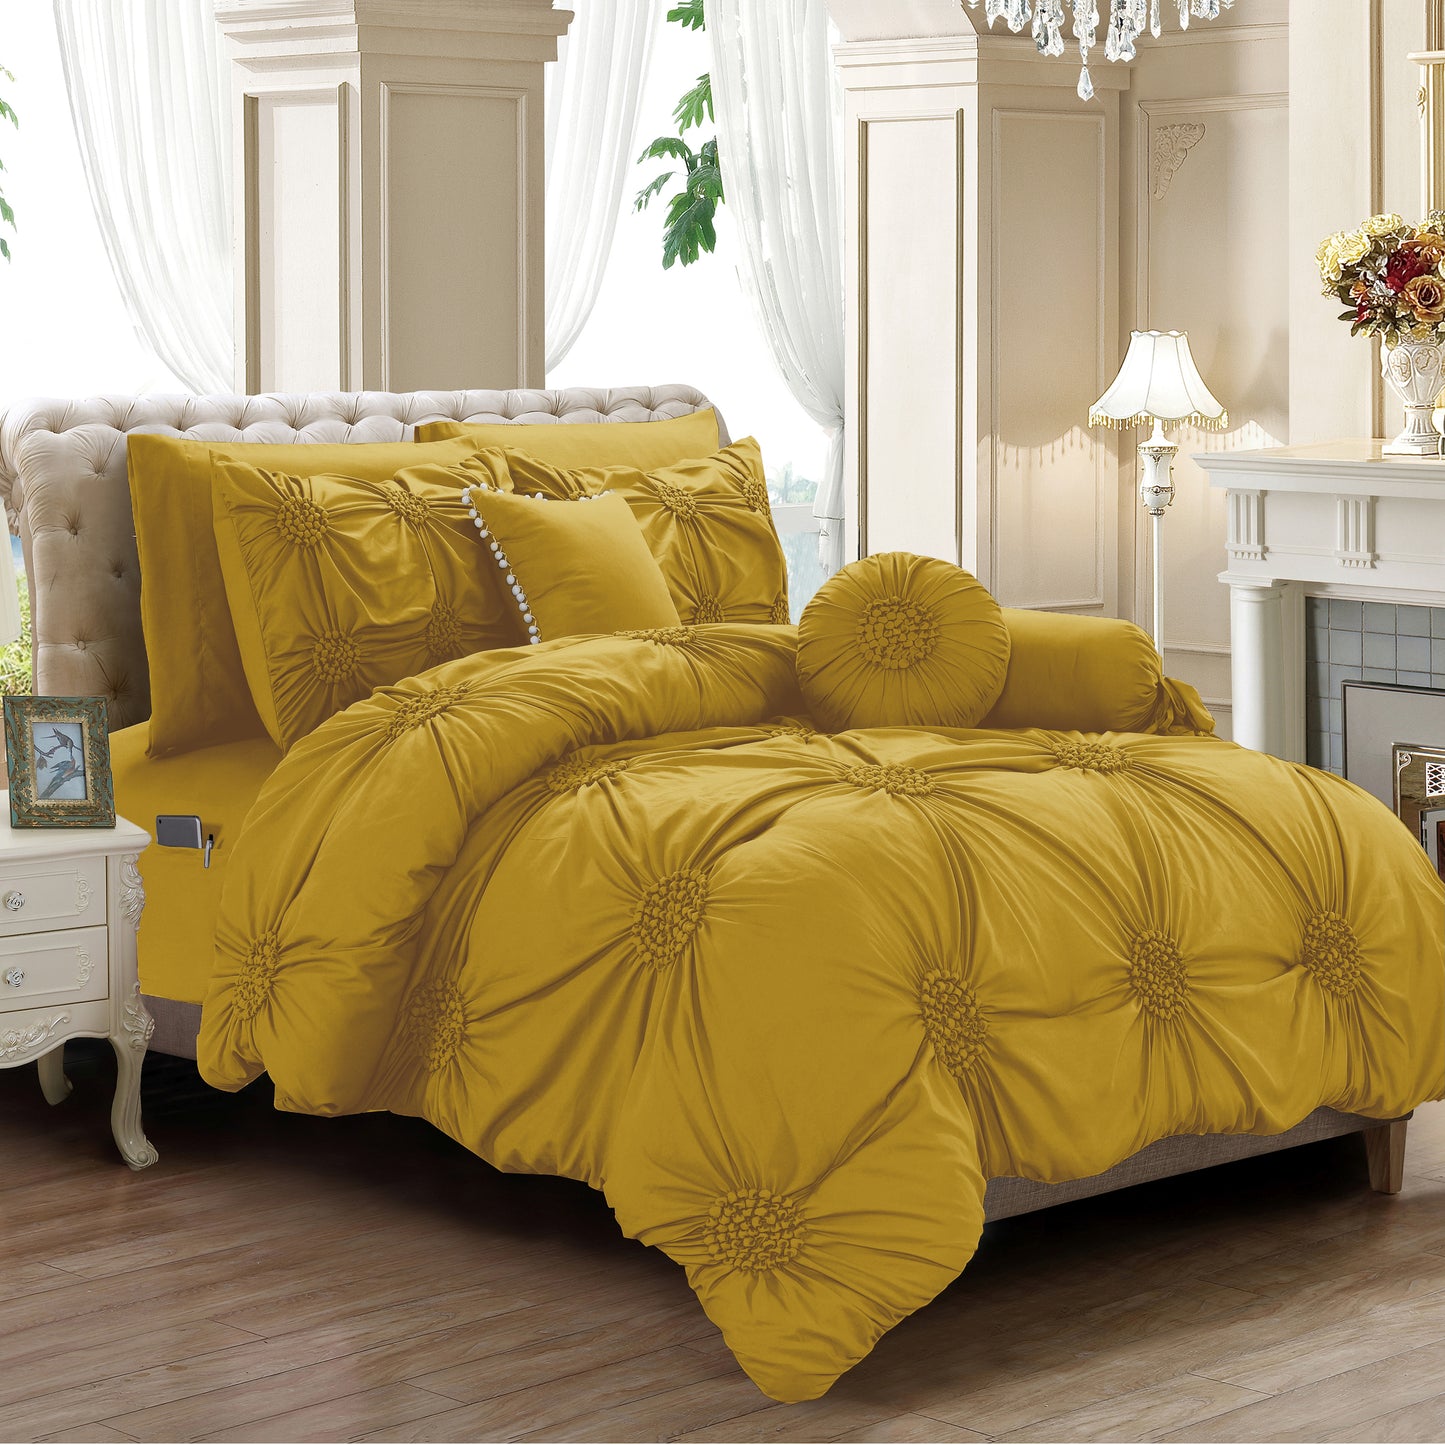 Elegant Comfort 10-Piece Sunflower Comforter Set - Includes 4-Piece Sheet Set with Double Sided Storage Pockets